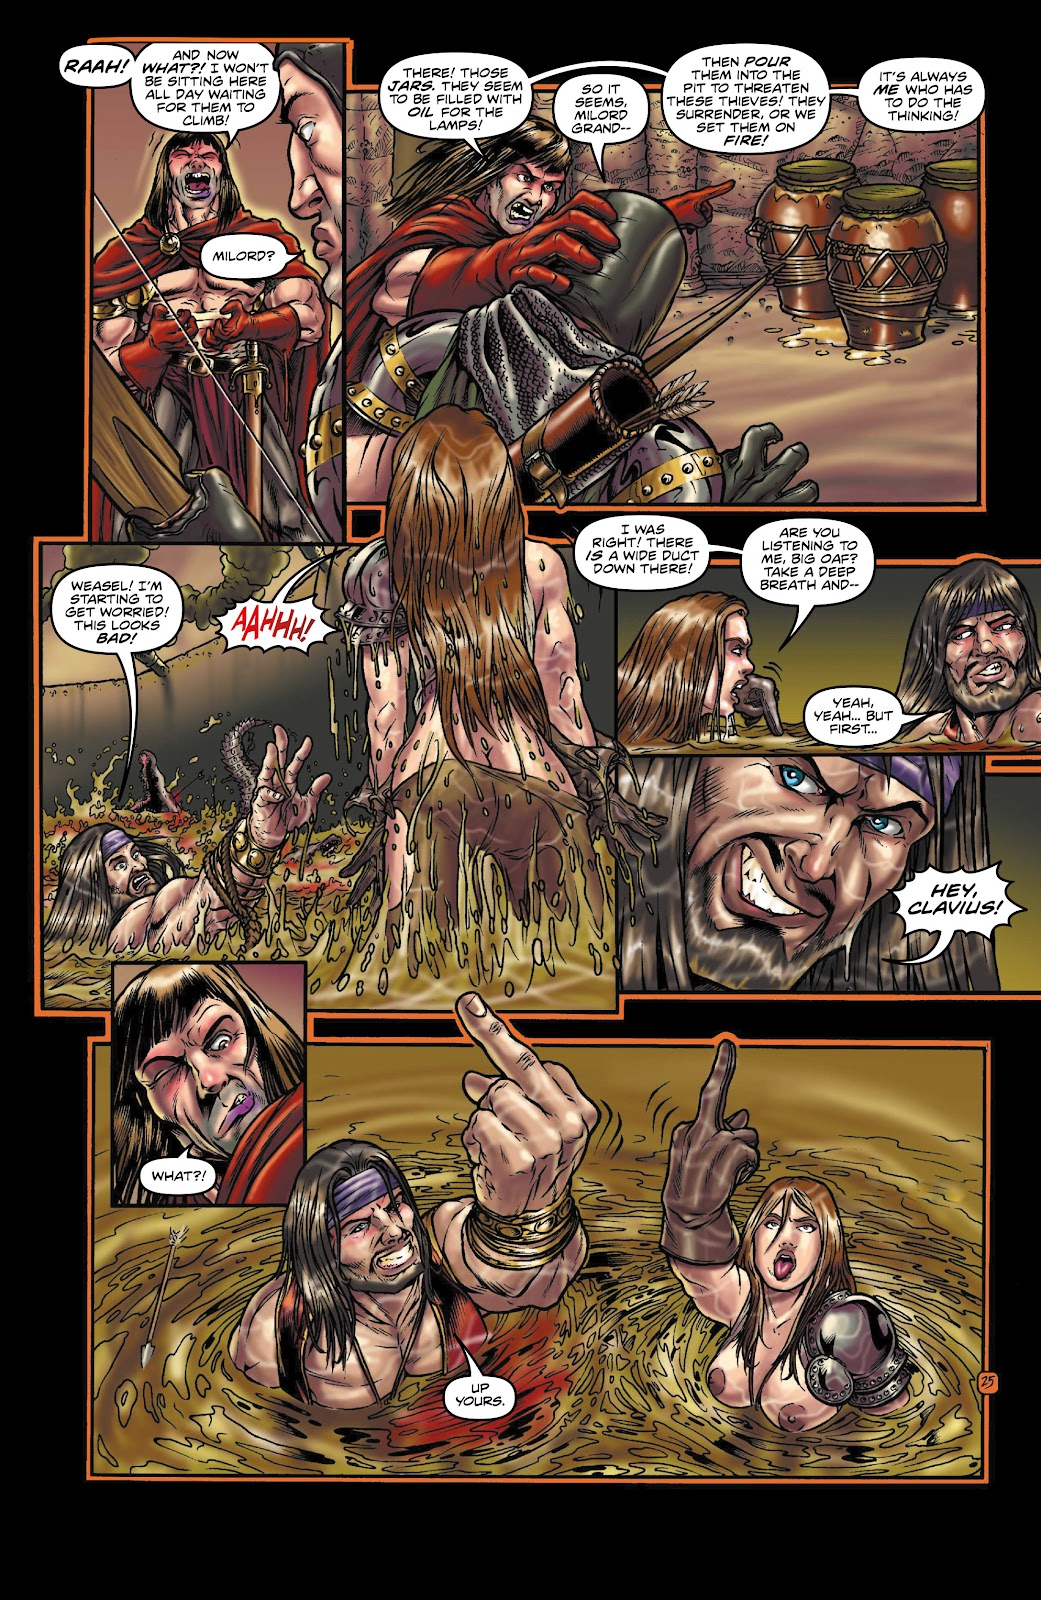 Rogues!: The Burning Heart issue 2 - Page 8